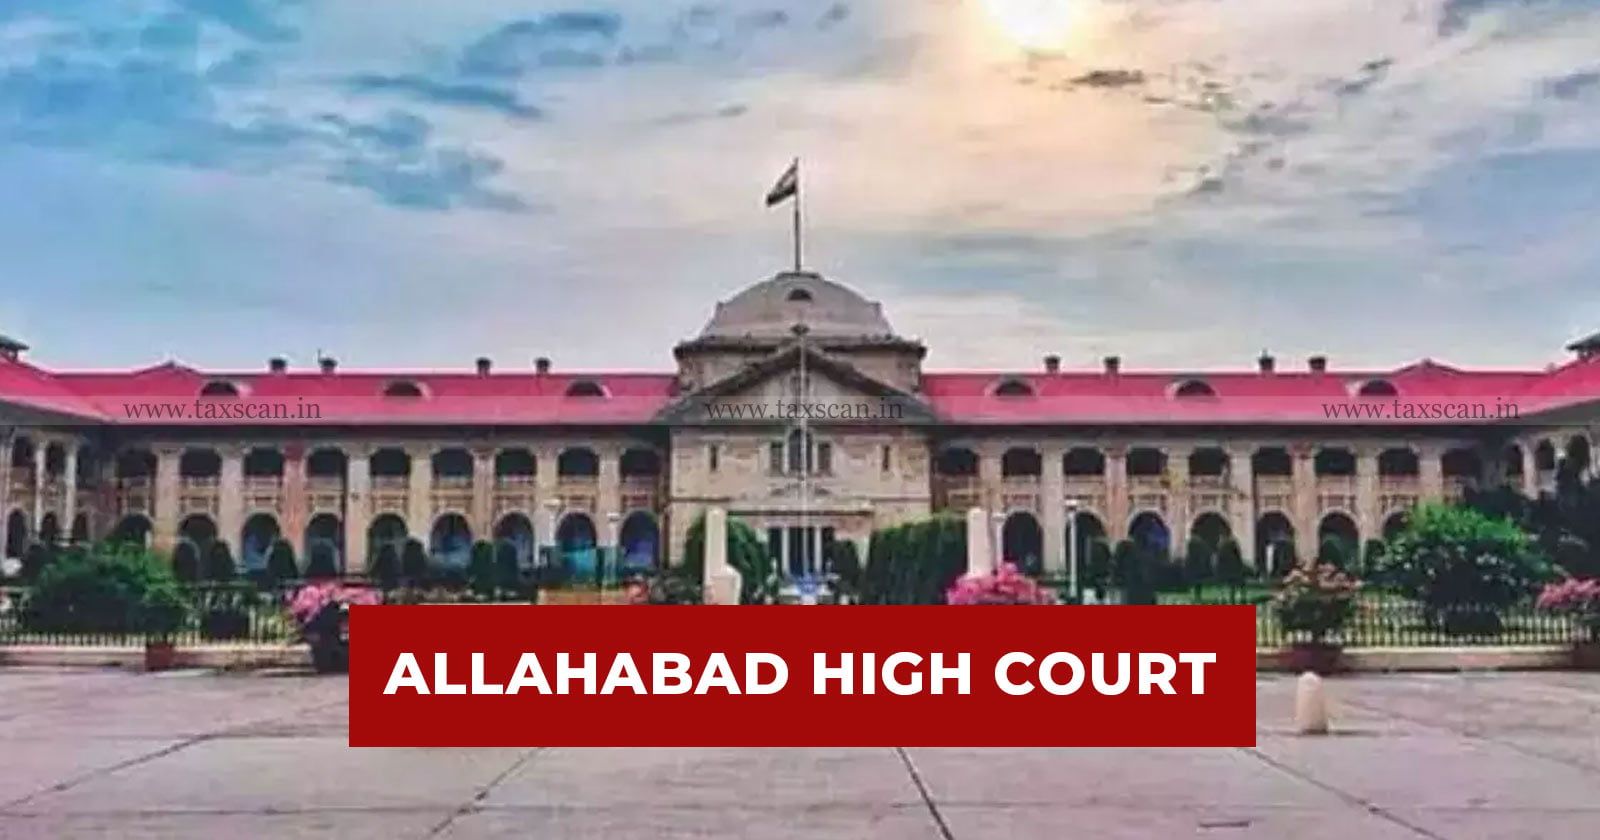 Allahabad High Court - Allahabad HC - Section 68 Income Tax Act - Genuineness of transaction in tax law - Taxscan